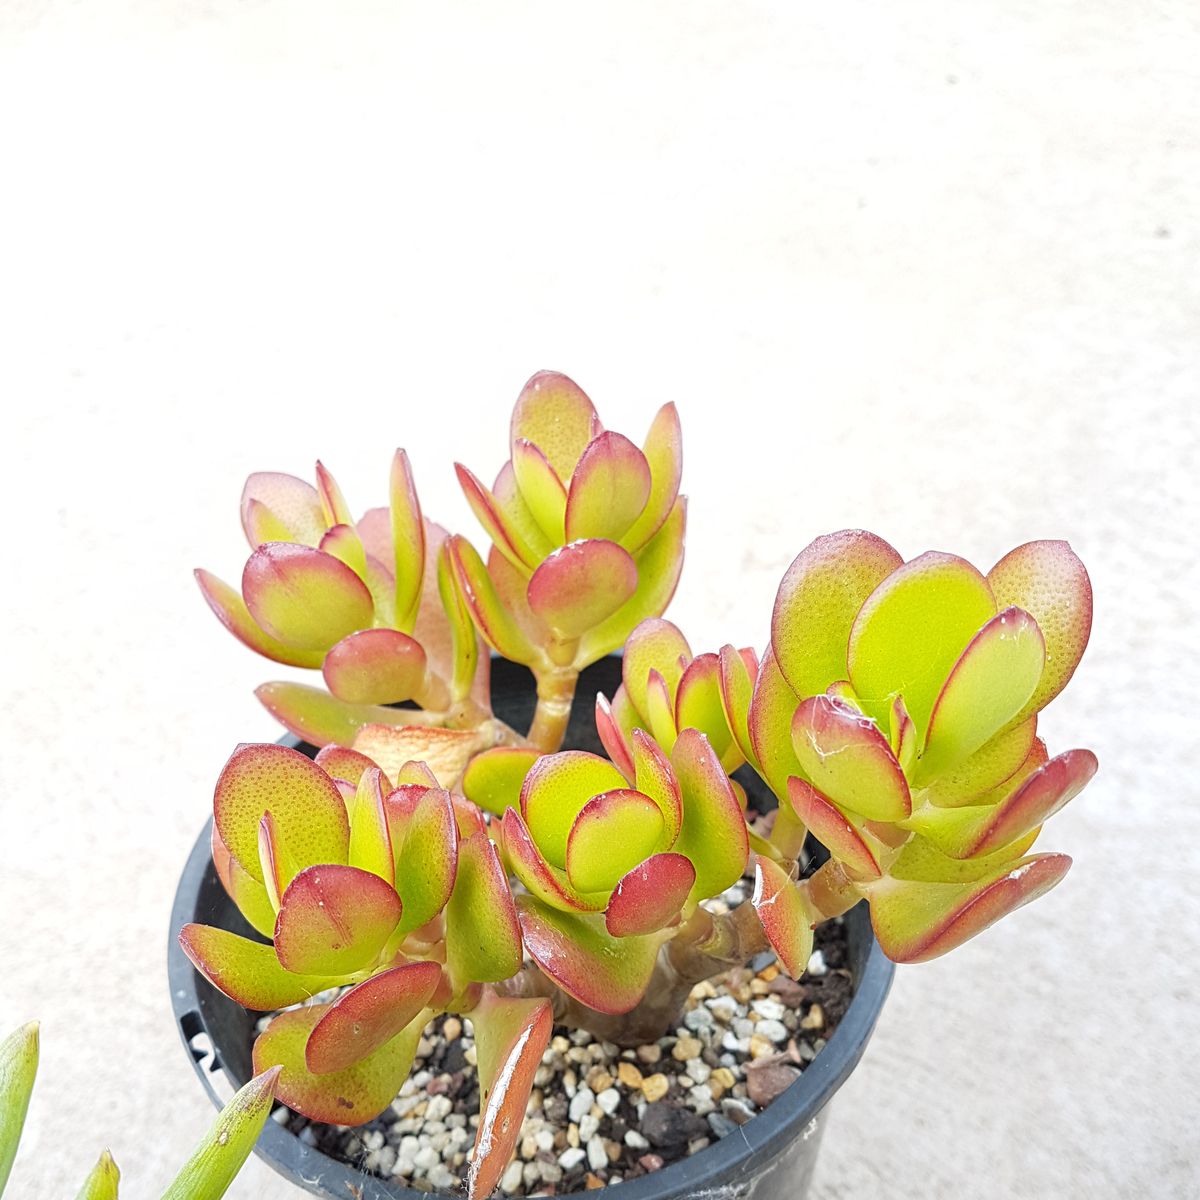 https://hips.hearstapps.com/hmg-prod/images/crassula-ovata-or-also-known-as-jade-plant-lucky-royalty-free-image-1645542160.jpg?crop=0.960xw:0.720xh;0,0.179xh&resize=1200:*